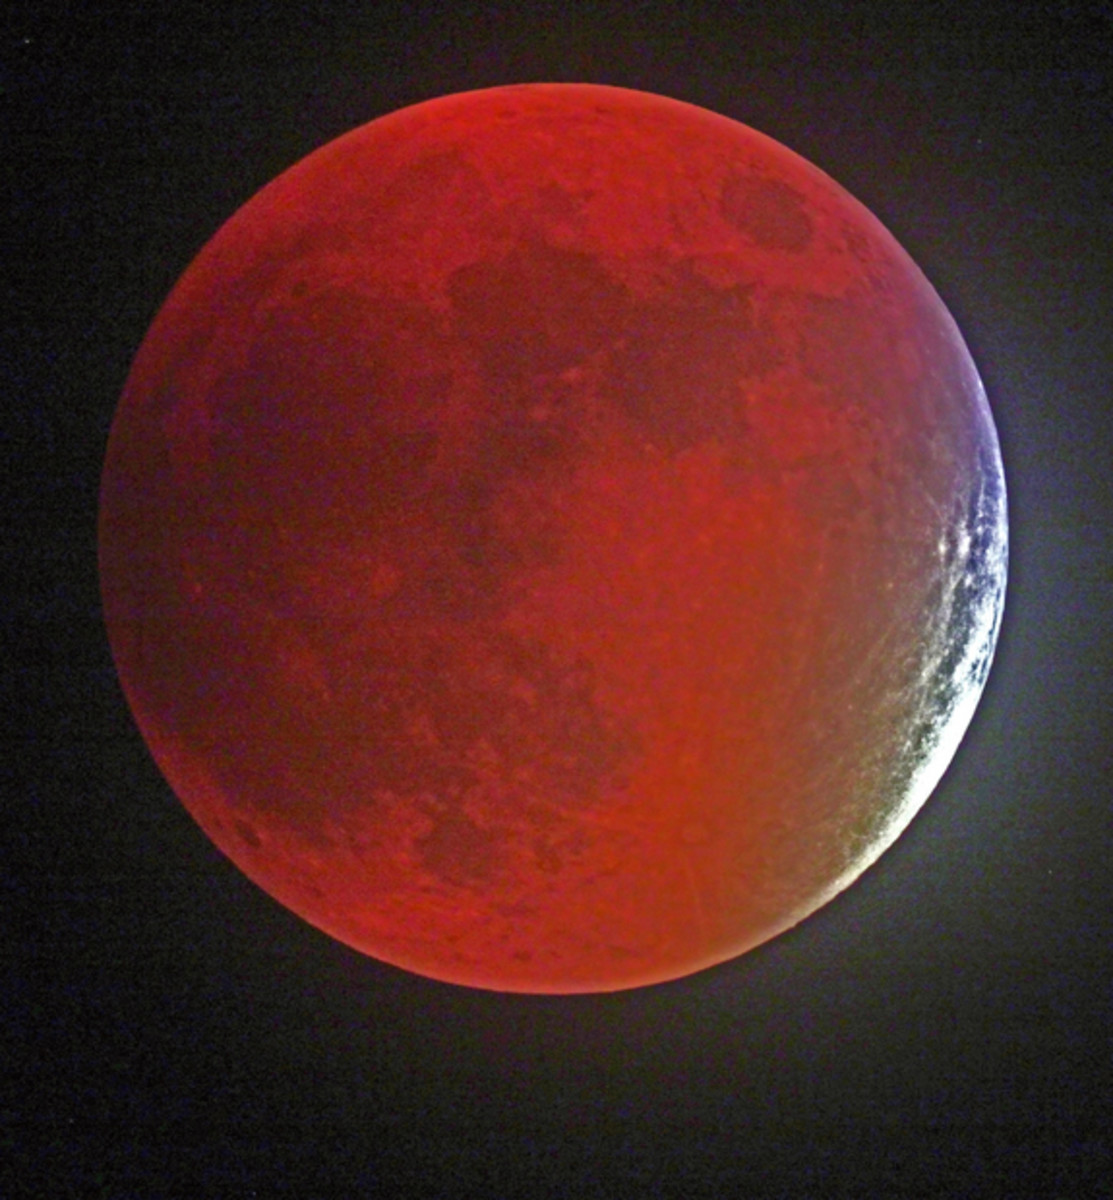 And there, in the sky hung a blood red moon.